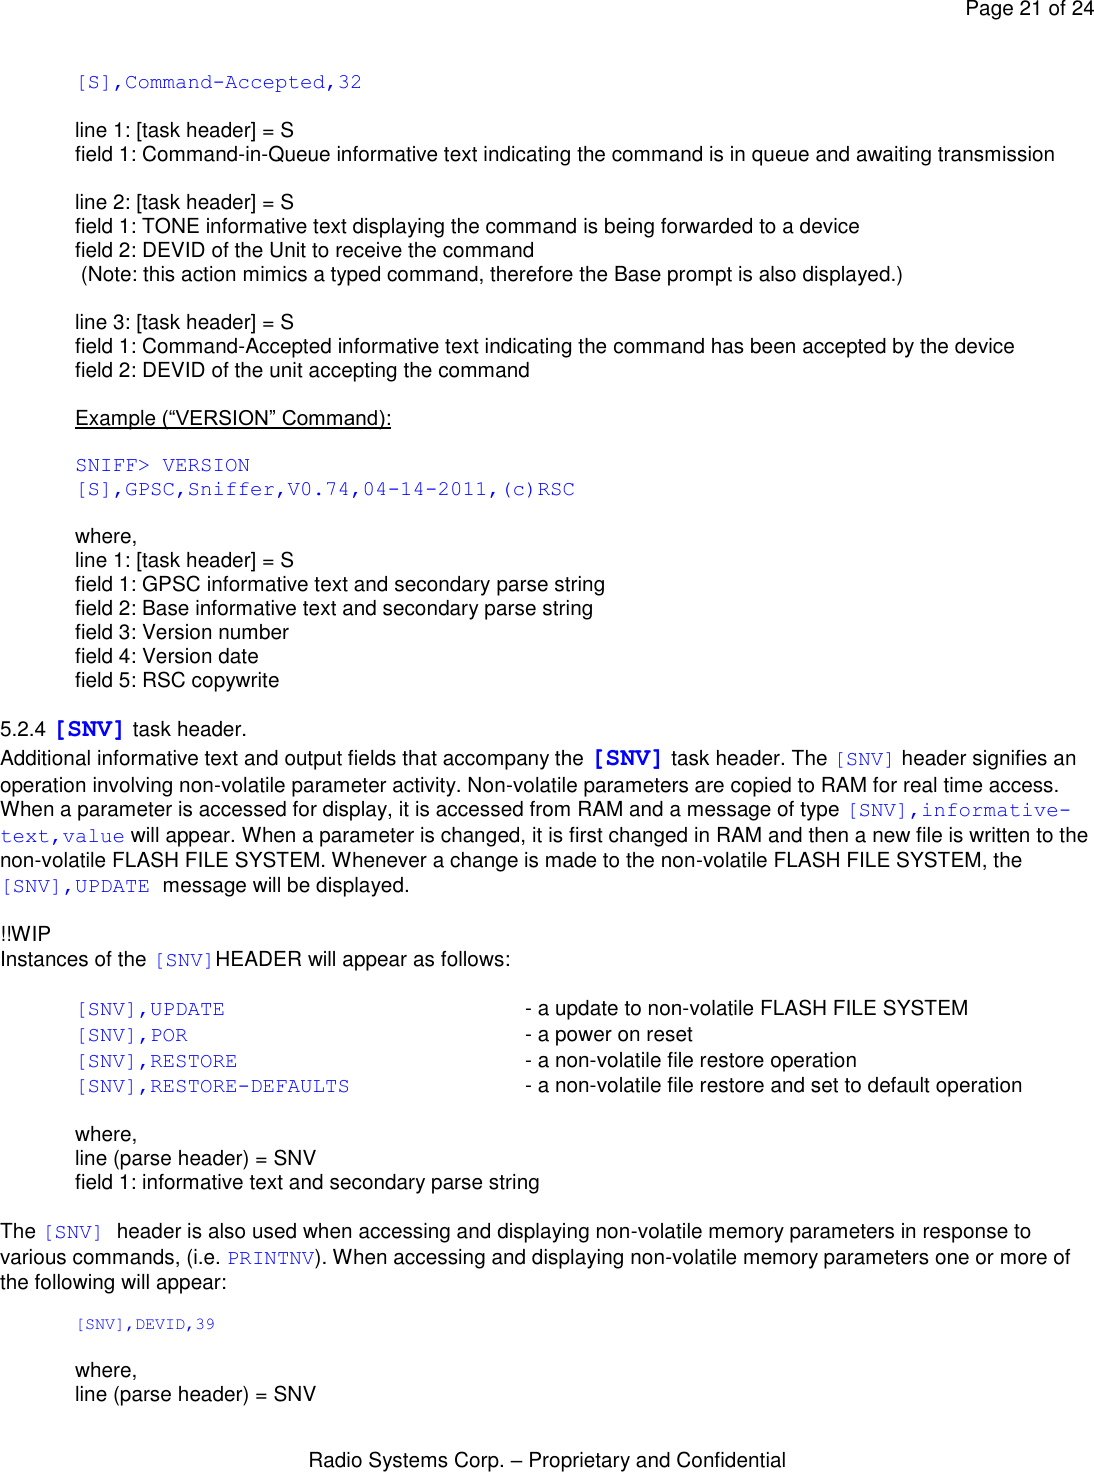 Page 21 of 24 Radio Systems Corp. – Proprietary and Confidential  [S],Command-Accepted,32  line 1: [task header] = S field 1: Command-in-Queue informative text indicating the command is in queue and awaiting transmission  line 2: [task header] = S field 1: TONE informative text displaying the command is being forwarded to a device field 2: DEVID of the Unit to receive the command  (Note: this action mimics a typed command, therefore the Base prompt is also displayed.)  line 3: [task header] = S field 1: Command-Accepted informative text indicating the command has been accepted by the device field 2: DEVID of the unit accepting the command  Example (“VERSION” Command):  SNIFF&gt; VERSION [S],GPSC,Sniffer,V0.74,04-14-2011,(c)RSC  where, line 1: [task header] = S field 1: GPSC informative text and secondary parse string field 2: Base informative text and secondary parse string field 3: Version number field 4: Version date field 5: RSC copywrite  5.2.4 [SNV] task header. Additional informative text and output fields that accompany the [SNV] task header. The [SNV] header signifies an operation involving non-volatile parameter activity. Non-volatile parameters are copied to RAM for real time access. When a parameter is accessed for display, it is accessed from RAM and a message of type [SNV],informative-text,value will appear. When a parameter is changed, it is first changed in RAM and then a new file is written to the non-volatile FLASH FILE SYSTEM. Whenever a change is made to the non-volatile FLASH FILE SYSTEM, the [SNV],UPDATE message will be displayed.  !!WIP Instances of the [SNV]HEADER will appear as follows:   [SNV],UPDATE    - a update to non-volatile FLASH FILE SYSTEM [SNV],POR     - a power on reset [SNV],RESTORE        - a non-volatile file restore operation [SNV],RESTORE-DEFAULTS   - a non-volatile file restore and set to default operation  where, line (parse header) = SNV field 1: informative text and secondary parse string  The [SNV] header is also used when accessing and displaying non-volatile memory parameters in response to various commands, (i.e. PRINTNV). When accessing and displaying non-volatile memory parameters one or more of the following will appear:  [SNV],DEVID,39  where, line (parse header) = SNV 